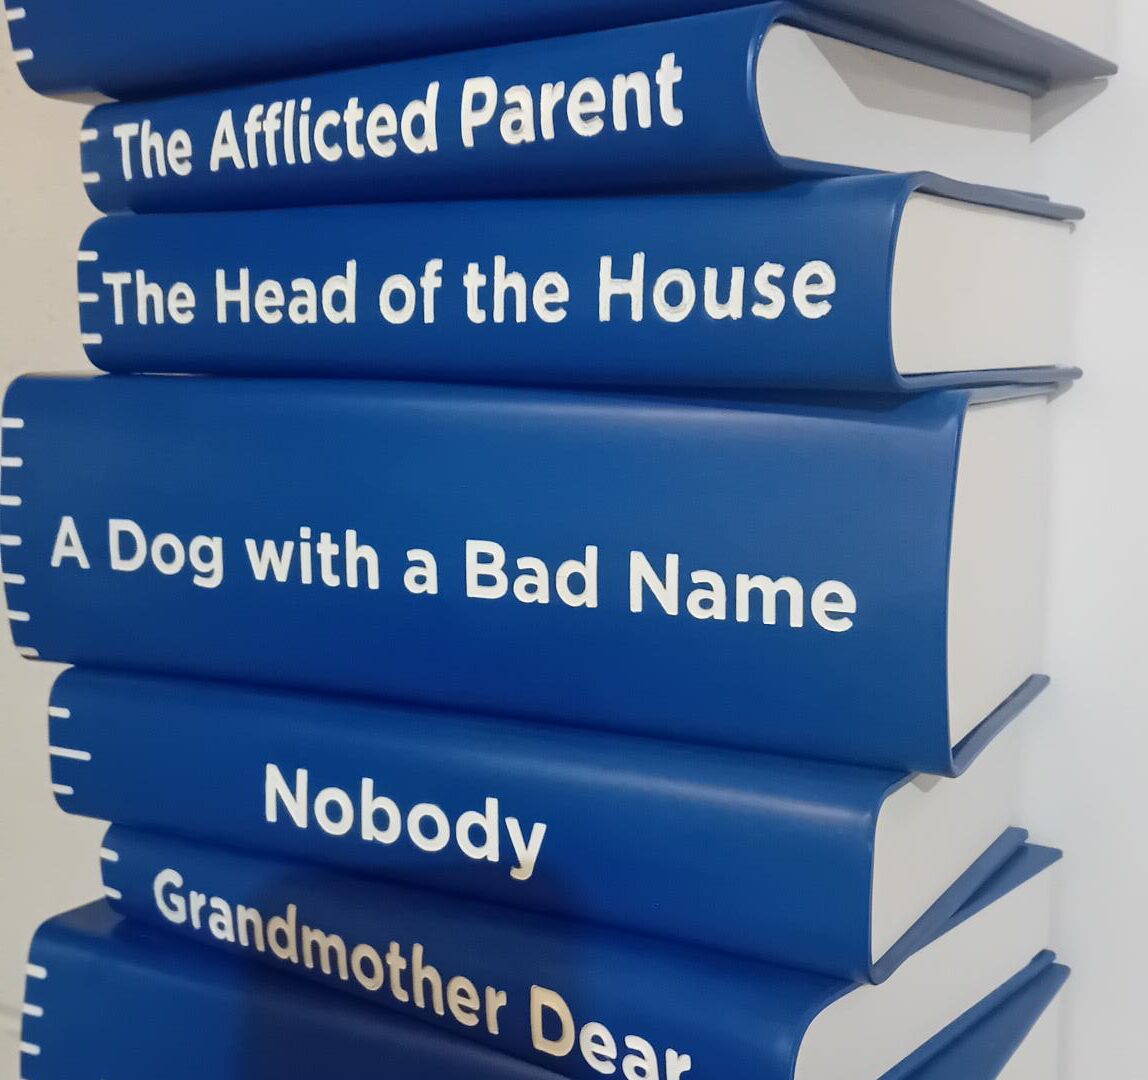 A stack of blue plastic books.